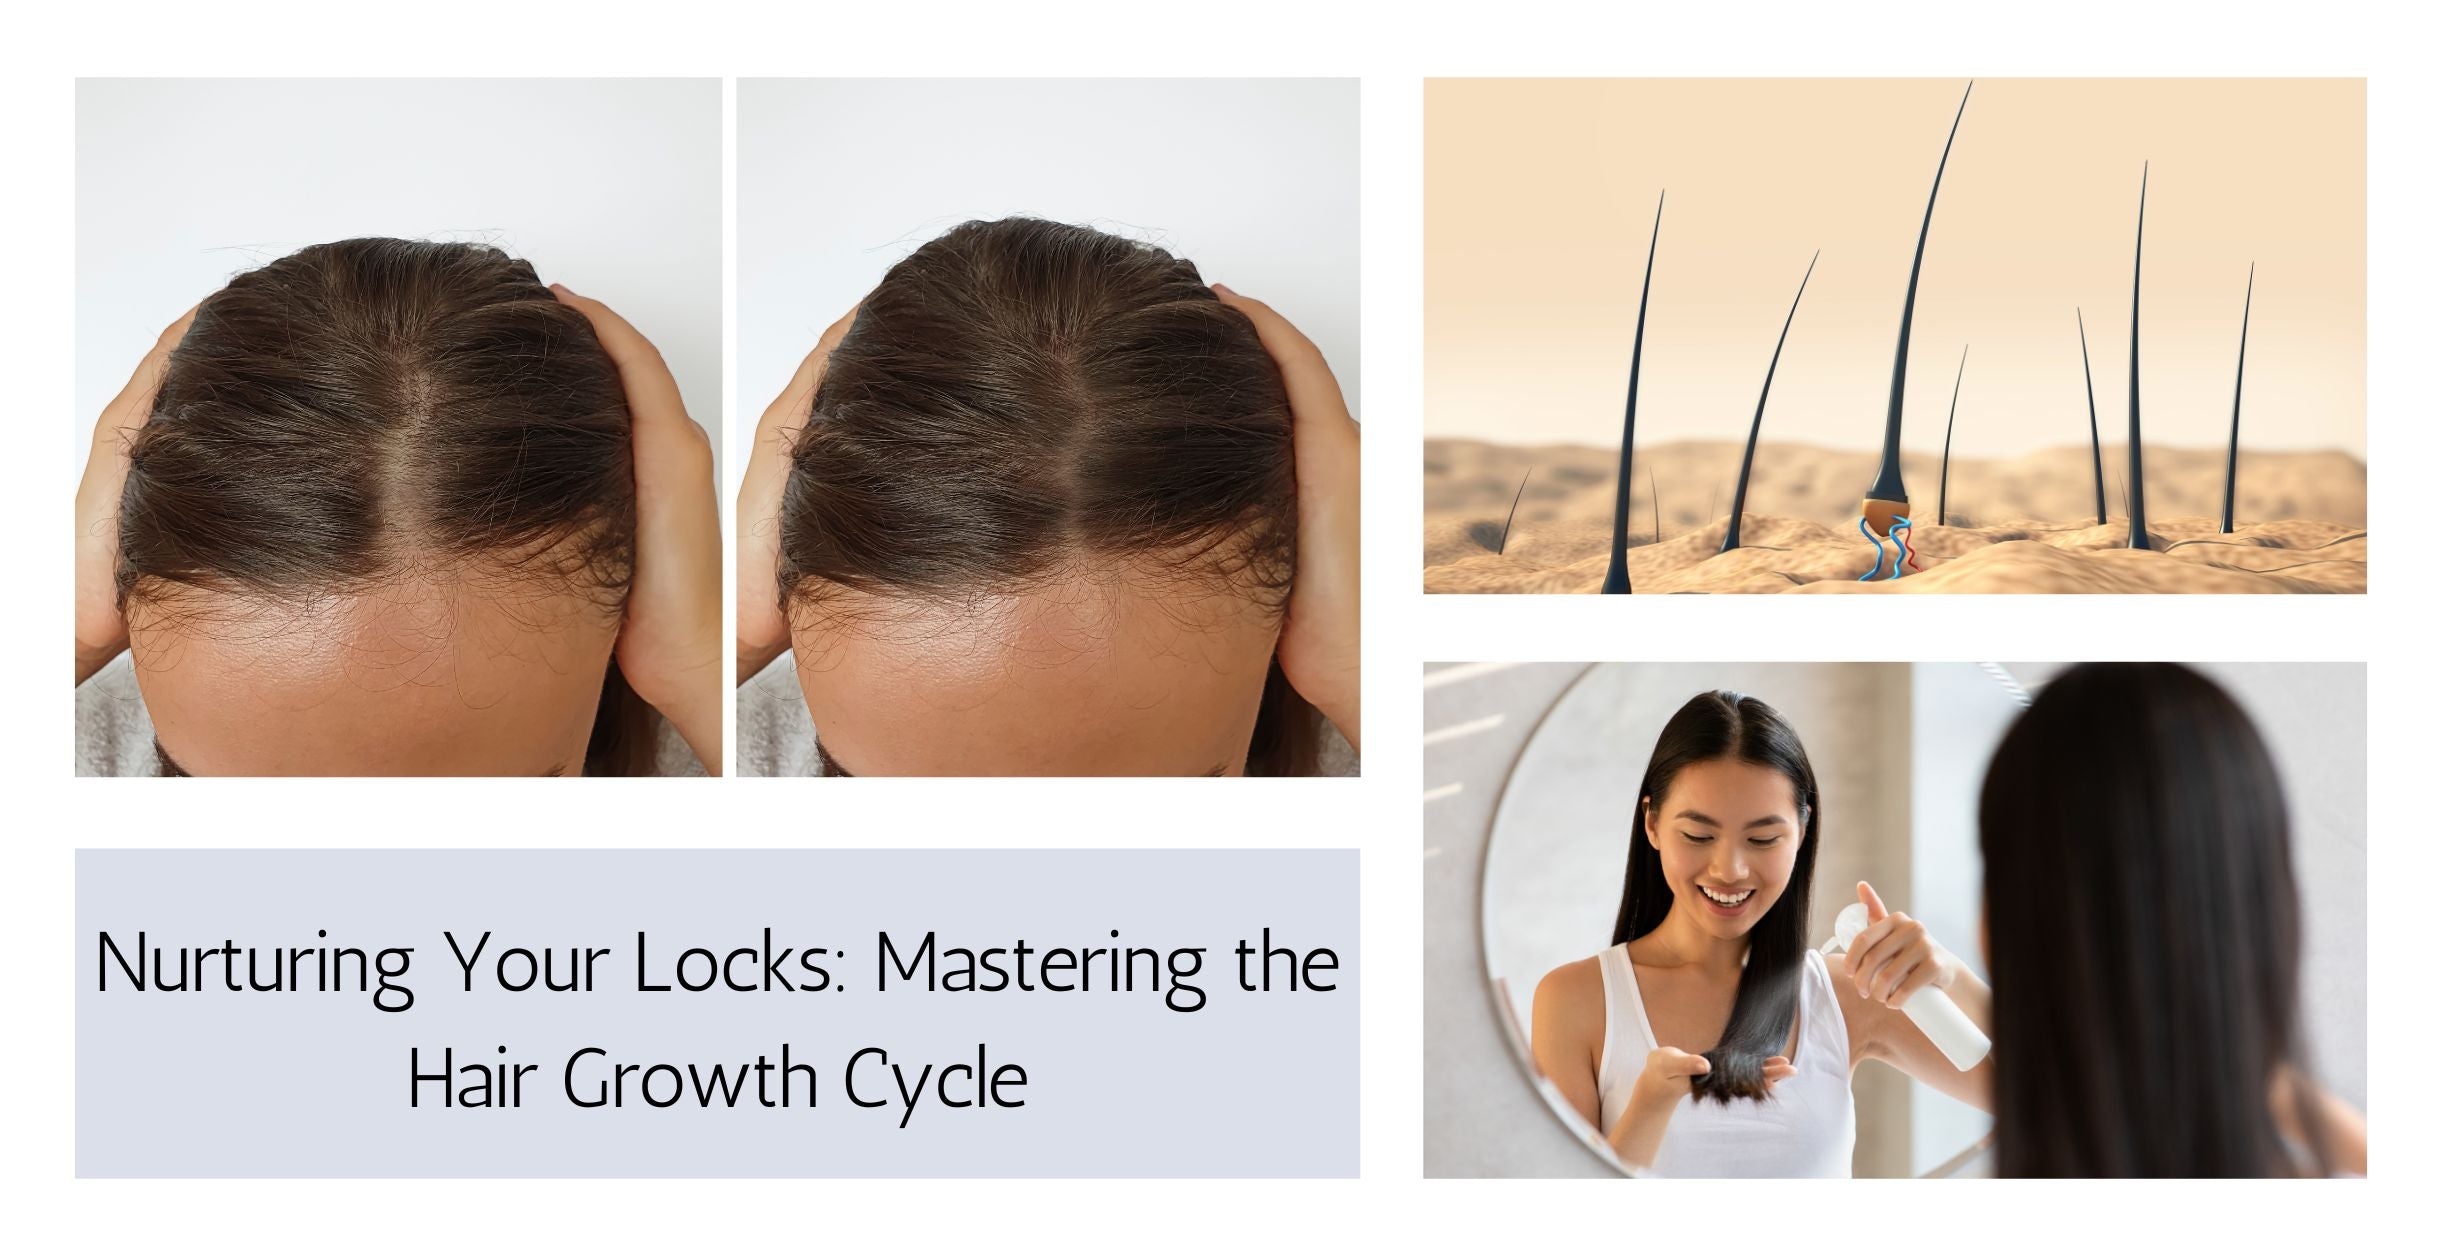 Nurturing Your Locks: Mastering the Hair Growth Cycle